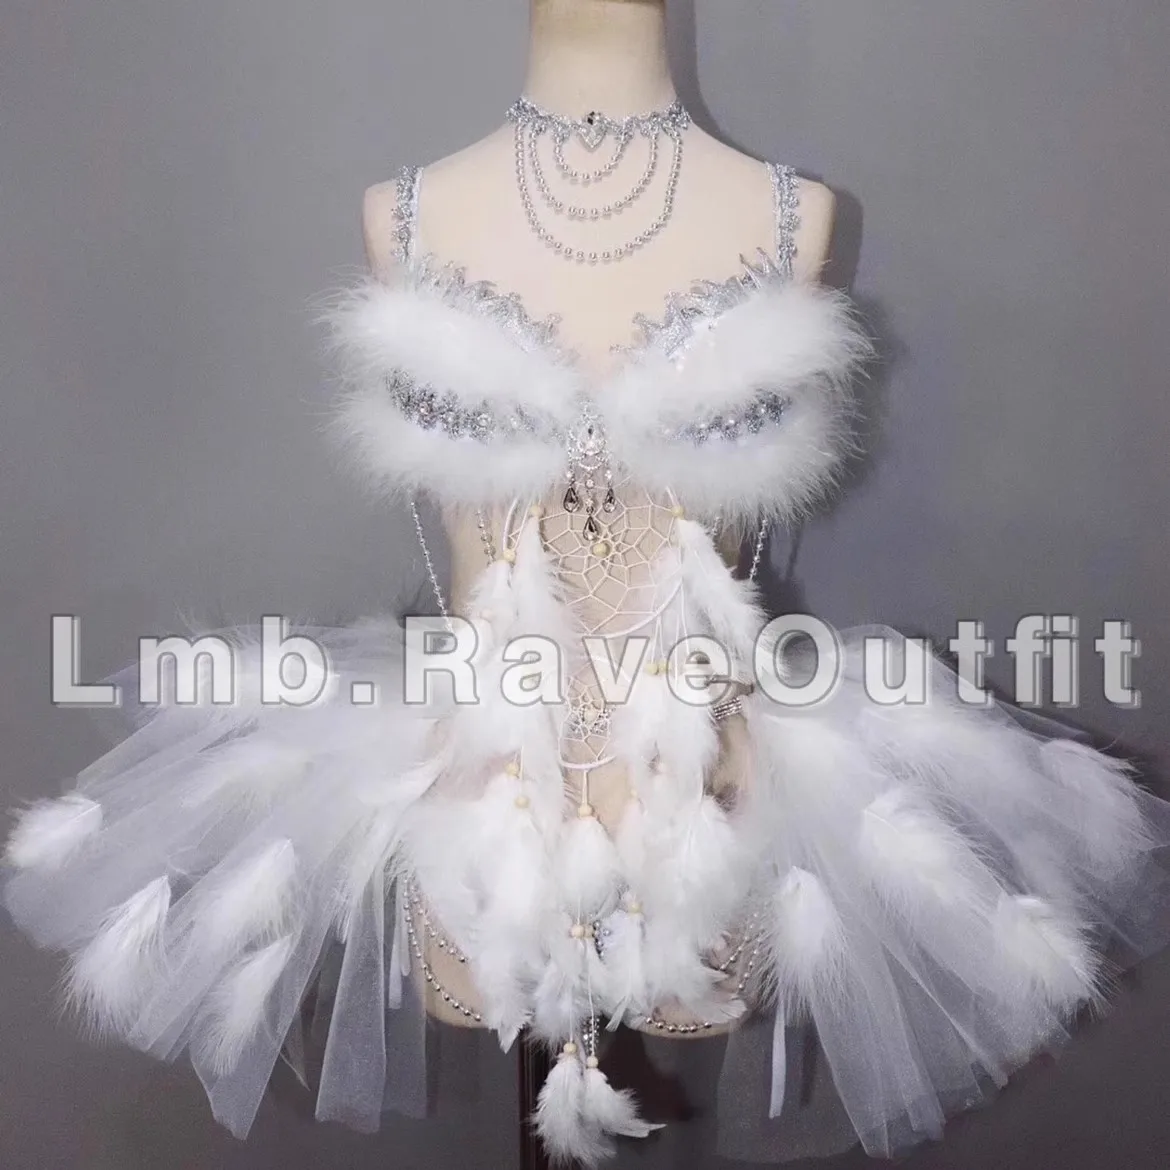 

White Feather Cute Sexy Tutu Skirt Outfits Women Clothing Singer Bar Nightclub Party Dance Stage Performance Costume